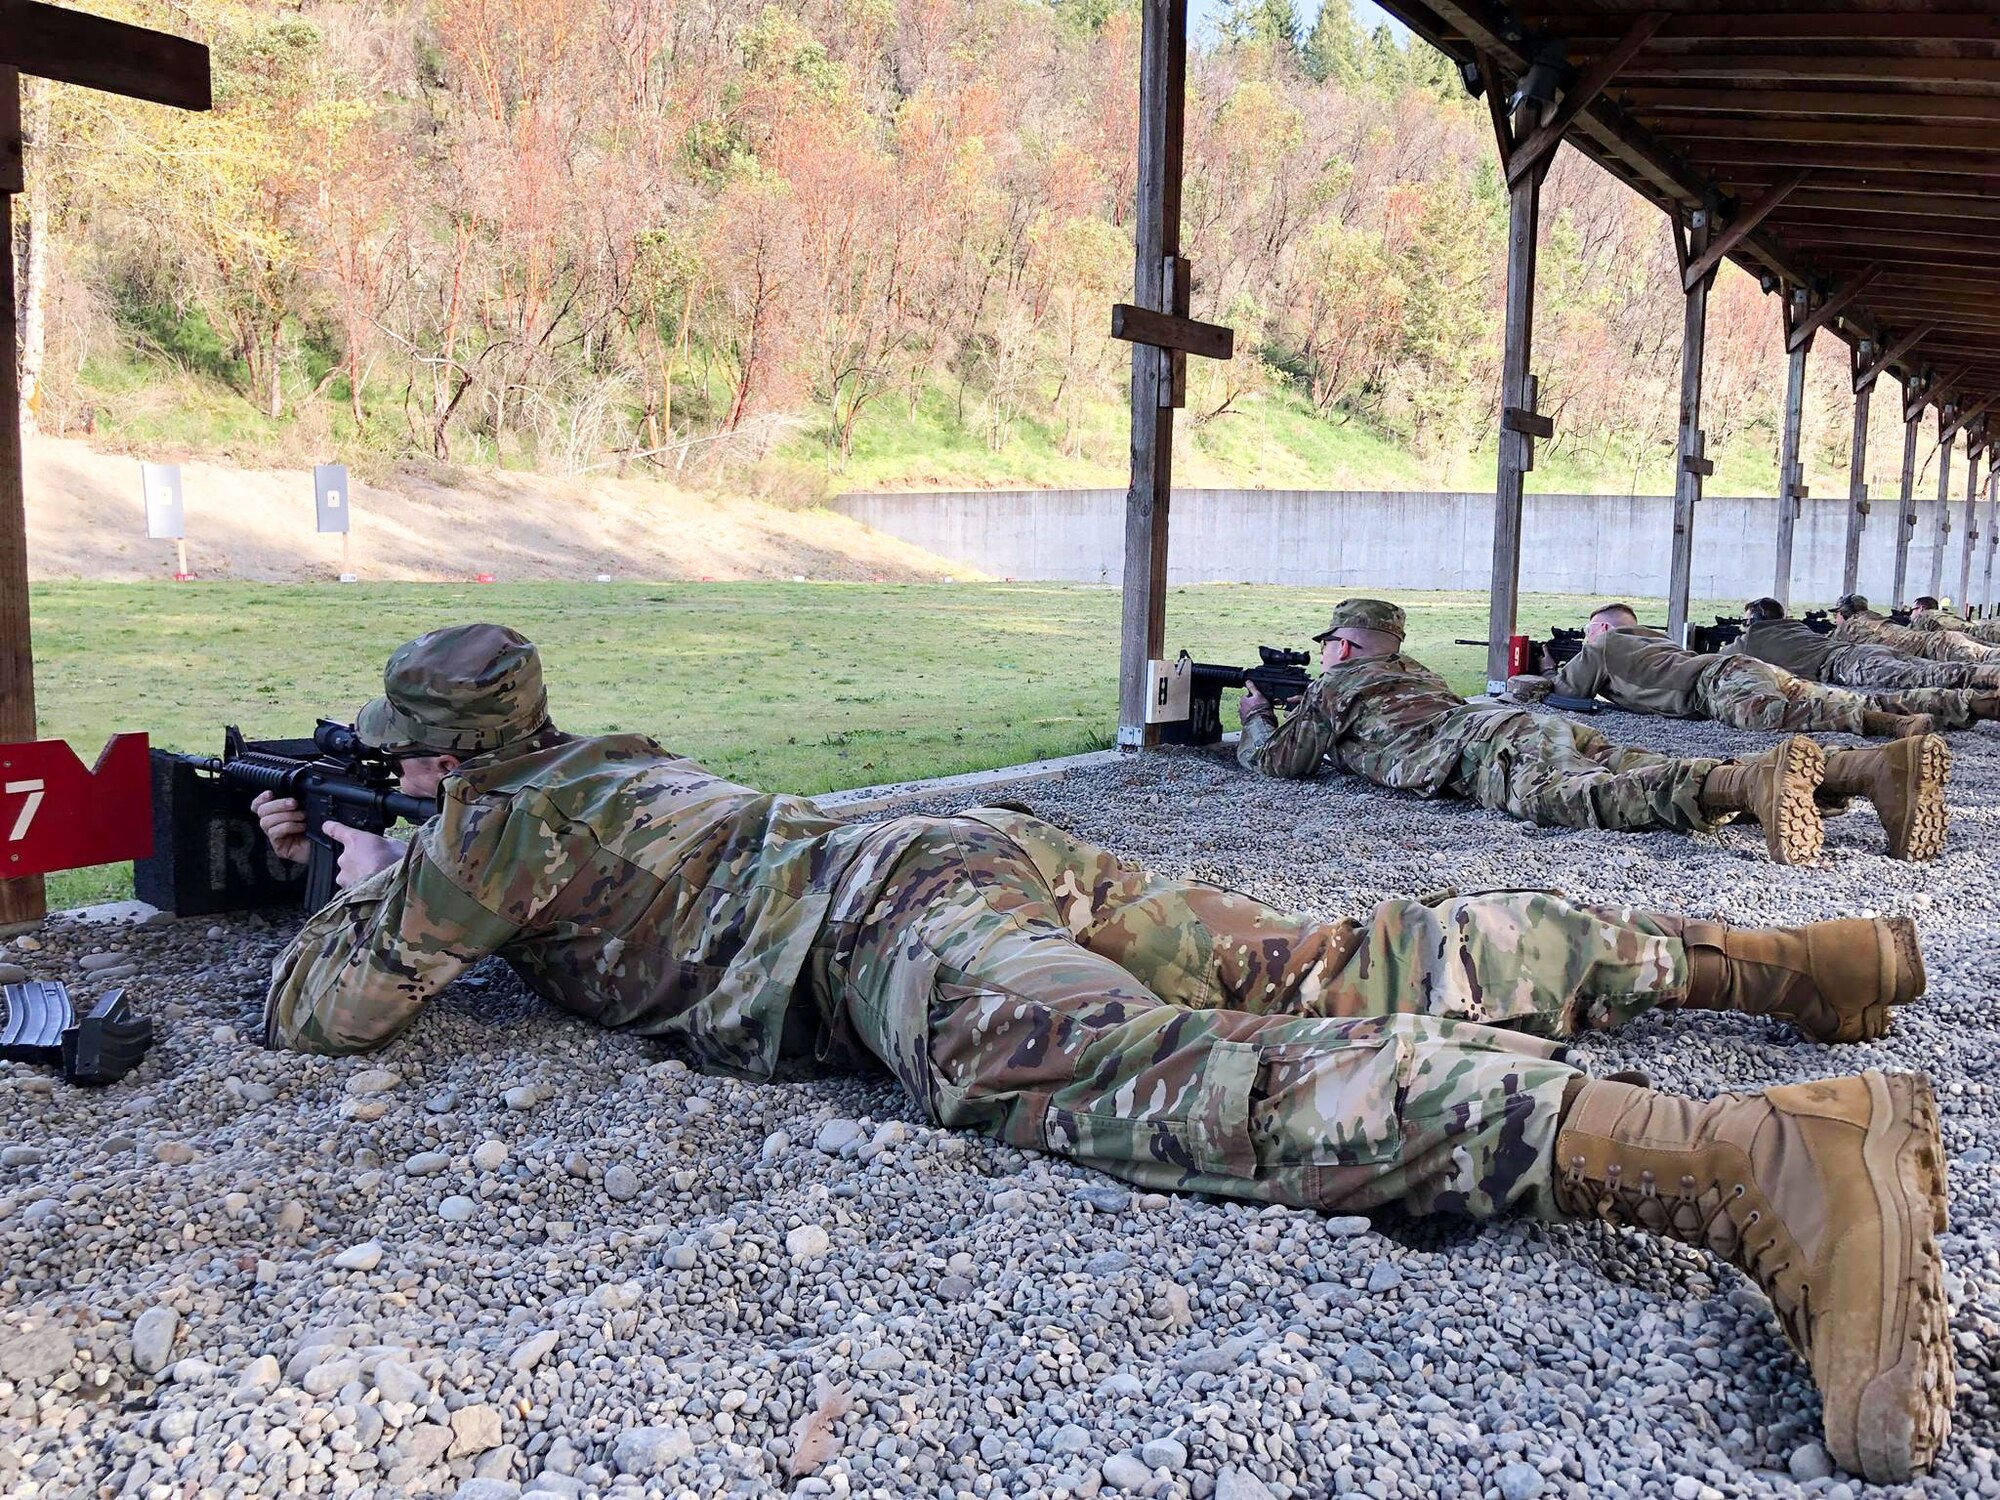 Members of the Washington Air National Guard's marksmanship team sight in their rifles at a Joint Base Lewis-McChord range April 4, 2019, prior to their departure to compete at the 2019 Winston P. Wilson Championship held at the Robinson Maneuver Training Center, Arkansas, April 7-10, 2019. (Courtesy photo by Staff Sgt. Shane Key)